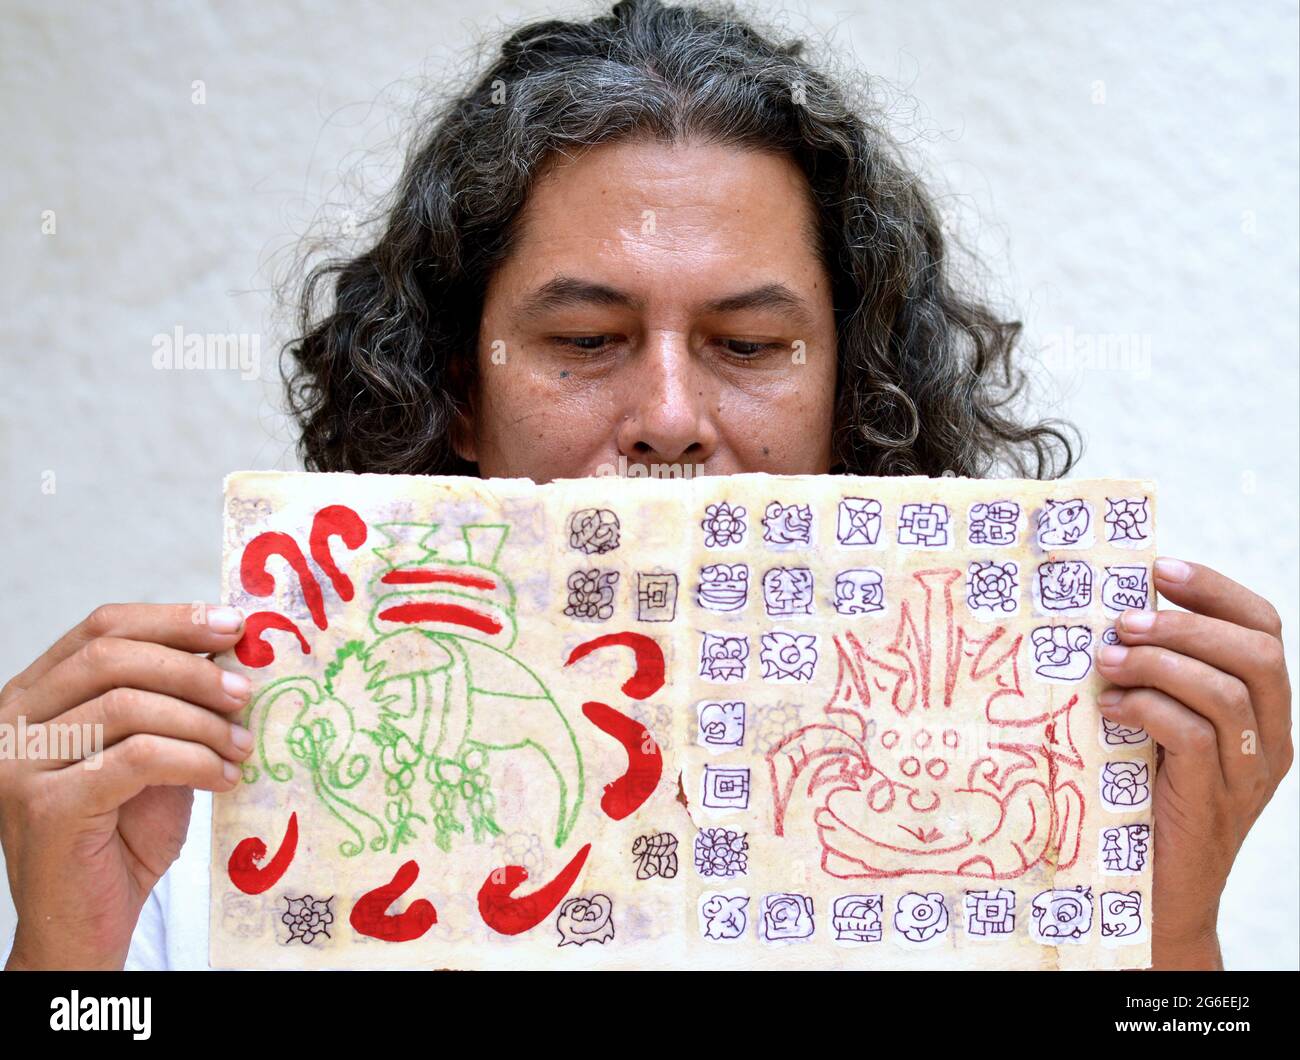 Mexican graphic artist and researcher of the ancient Maya writing system holds up a hand-crafted and hand-painted leporello about the Maya glyphs. Stock Photo